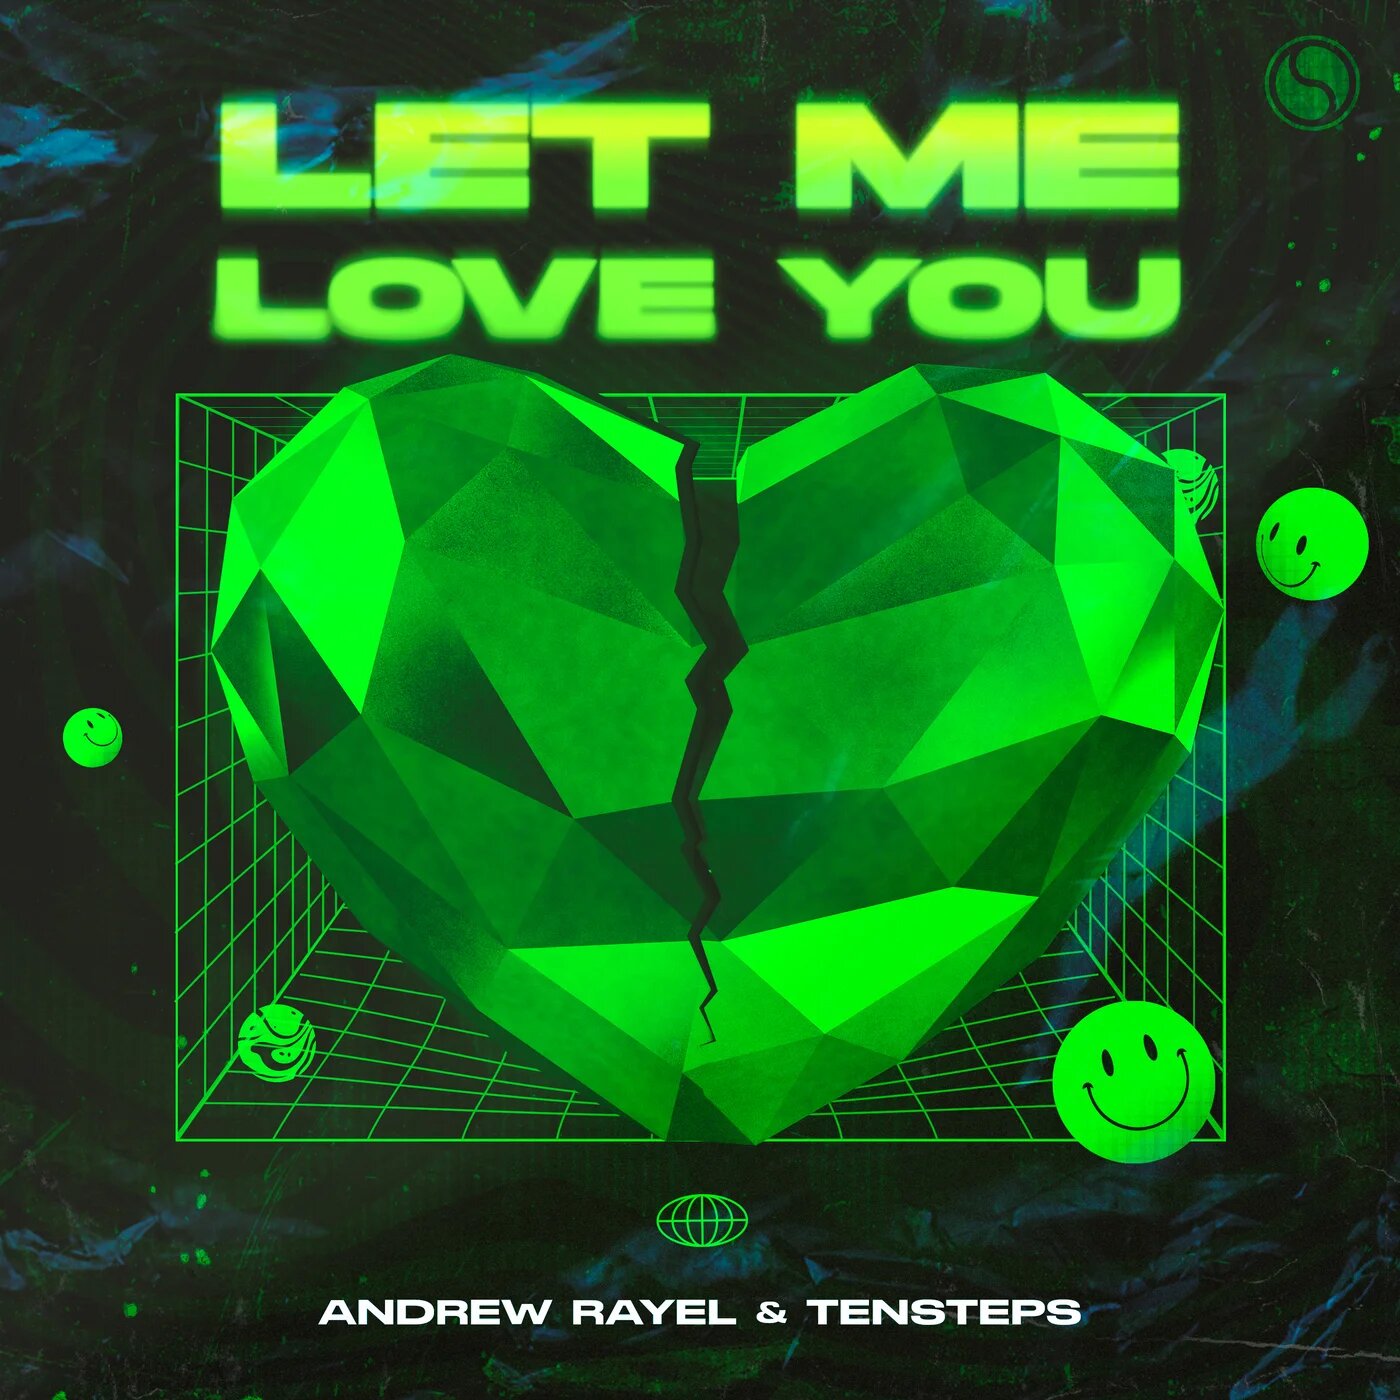 Andrew Rayel & Tensteps - Let Me Love You (Extended Mix)